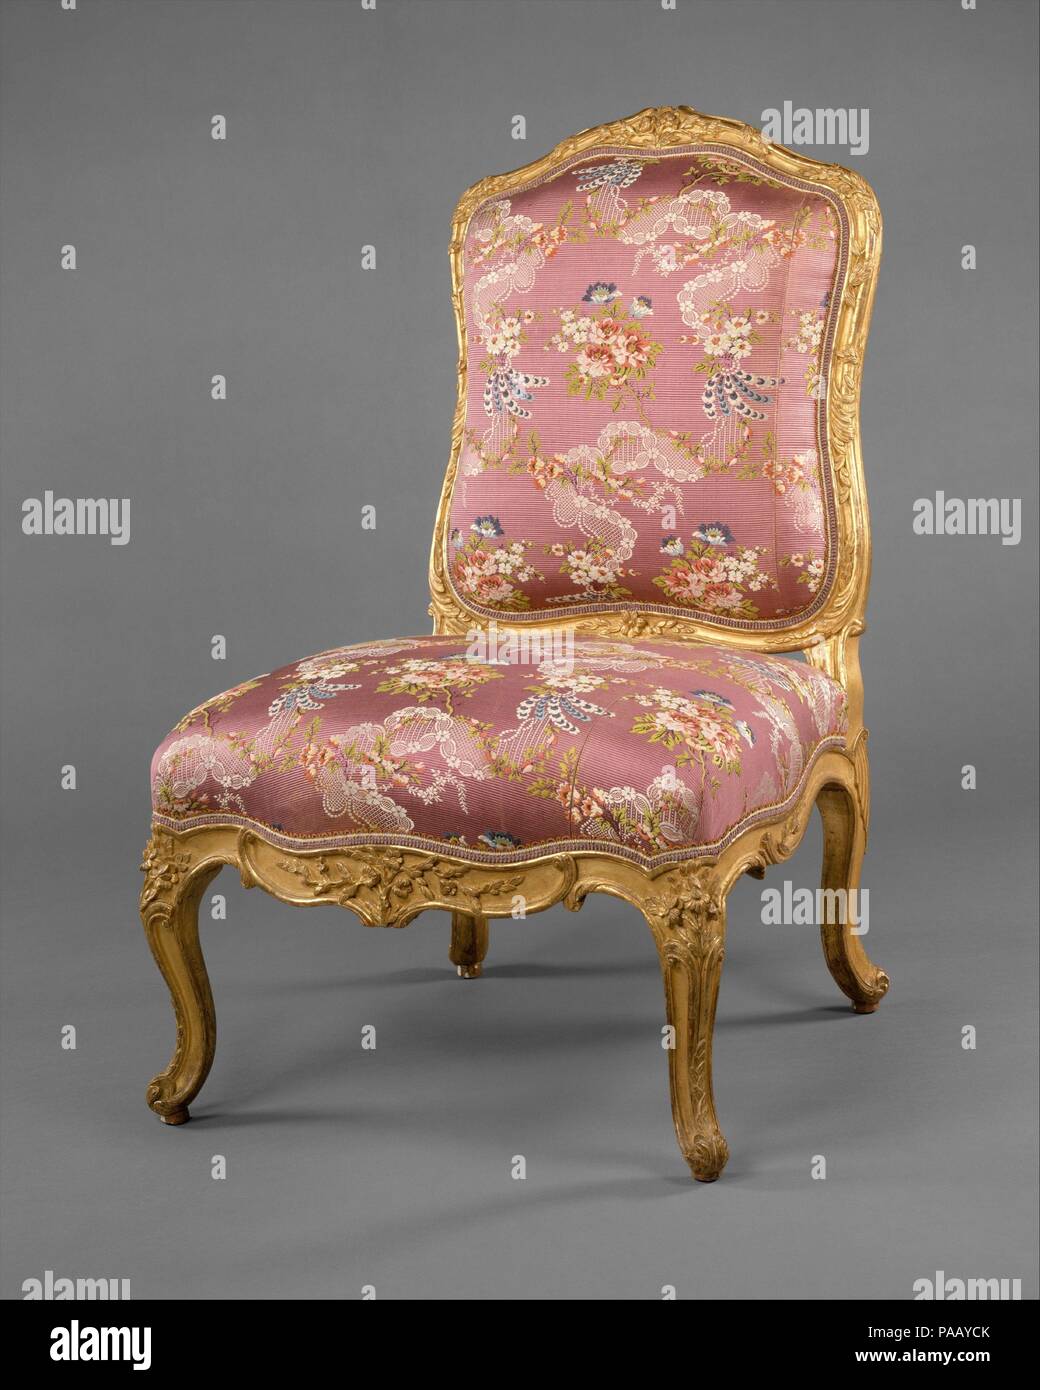 Pair of side chairs (chaises à la reine). Culture: French. Dimensions: Each, 36 1/4 x 24 1/2 x 26 in. (92.1 x 62.2 x 66cm). Maker: Michel Gourdin (French, master 1752, died after 1777). Date: ca. 1752-60.  The top rail of the back and front rail of the seat are carved with three flowers flanked by branches of flowers and leaves. Both Michel and Jean-Baptiste Gourdin used the motif of a flower at each front corner above a split stem running down the fore edge of the front leg with an acanthus leaf on the foot. Other chairs by Michel Gourdin are in the Louvre, the Bouvier Collection in the Musée Stock Photo